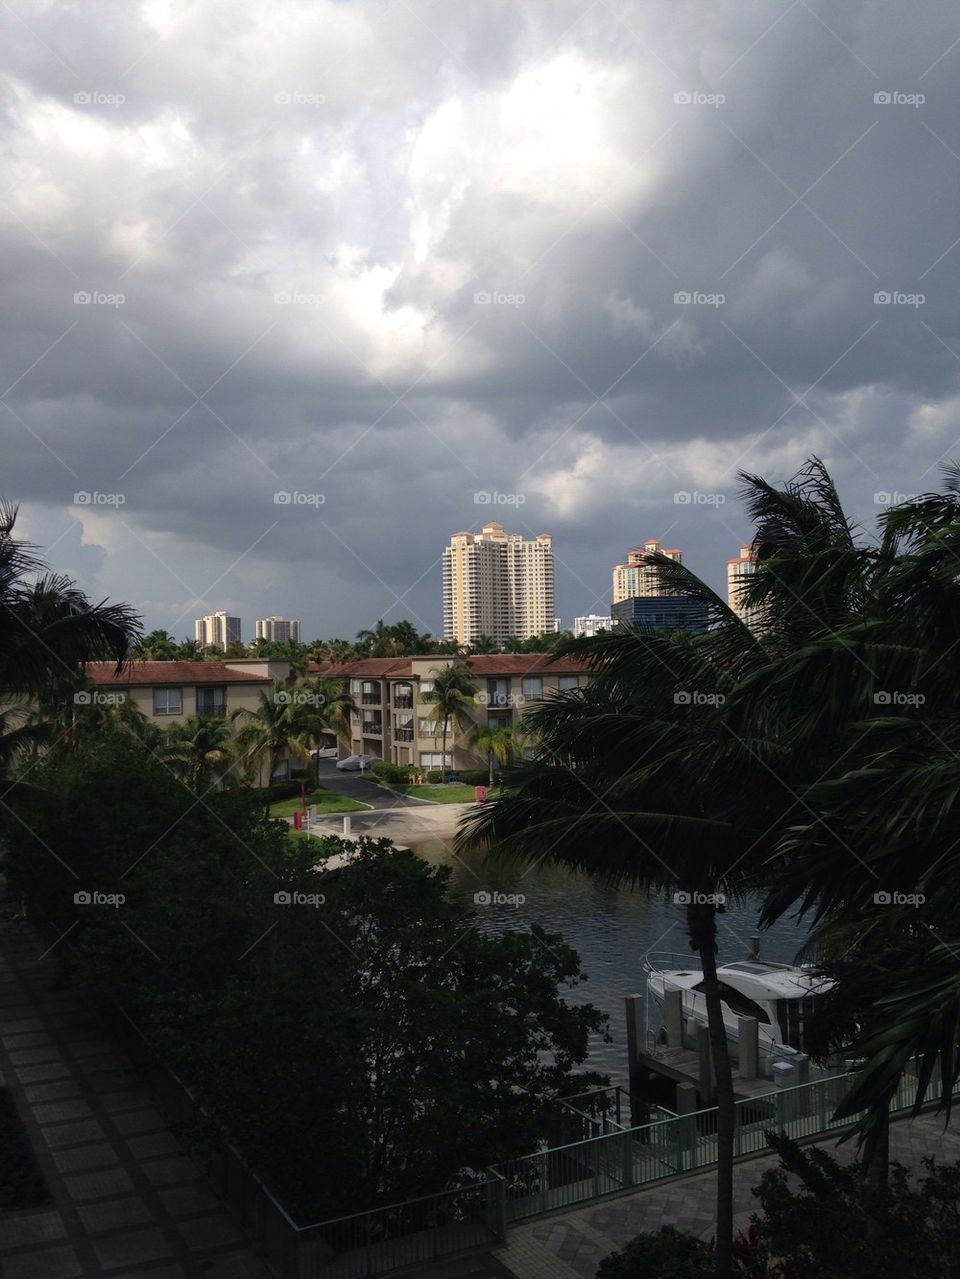 Stormy day in Miami